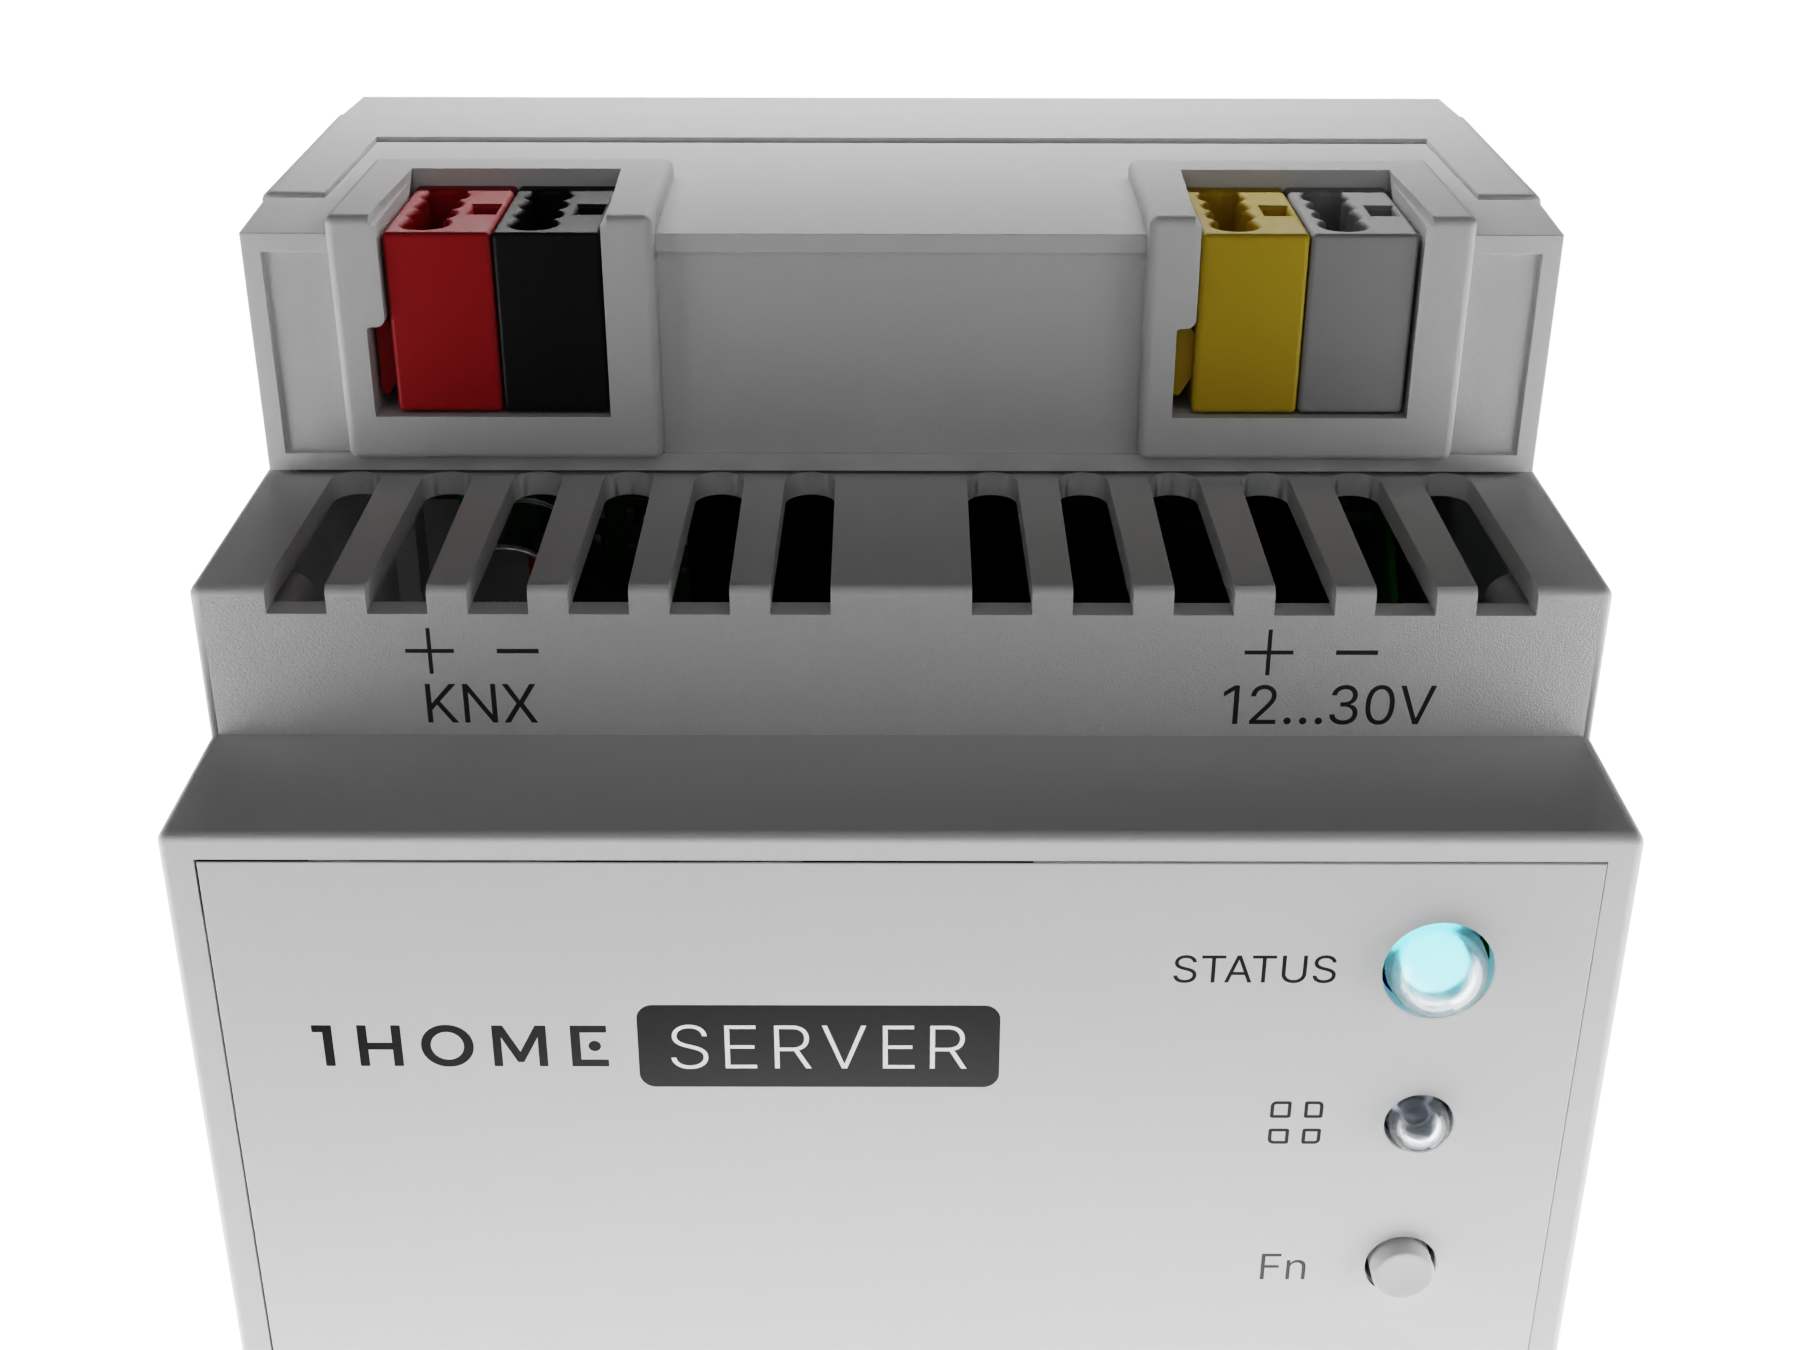 1Home Server for KNX/Loxone. Full integration with Apple Home, Google Home, Samsung SmartThings, voice interfaces and Matter